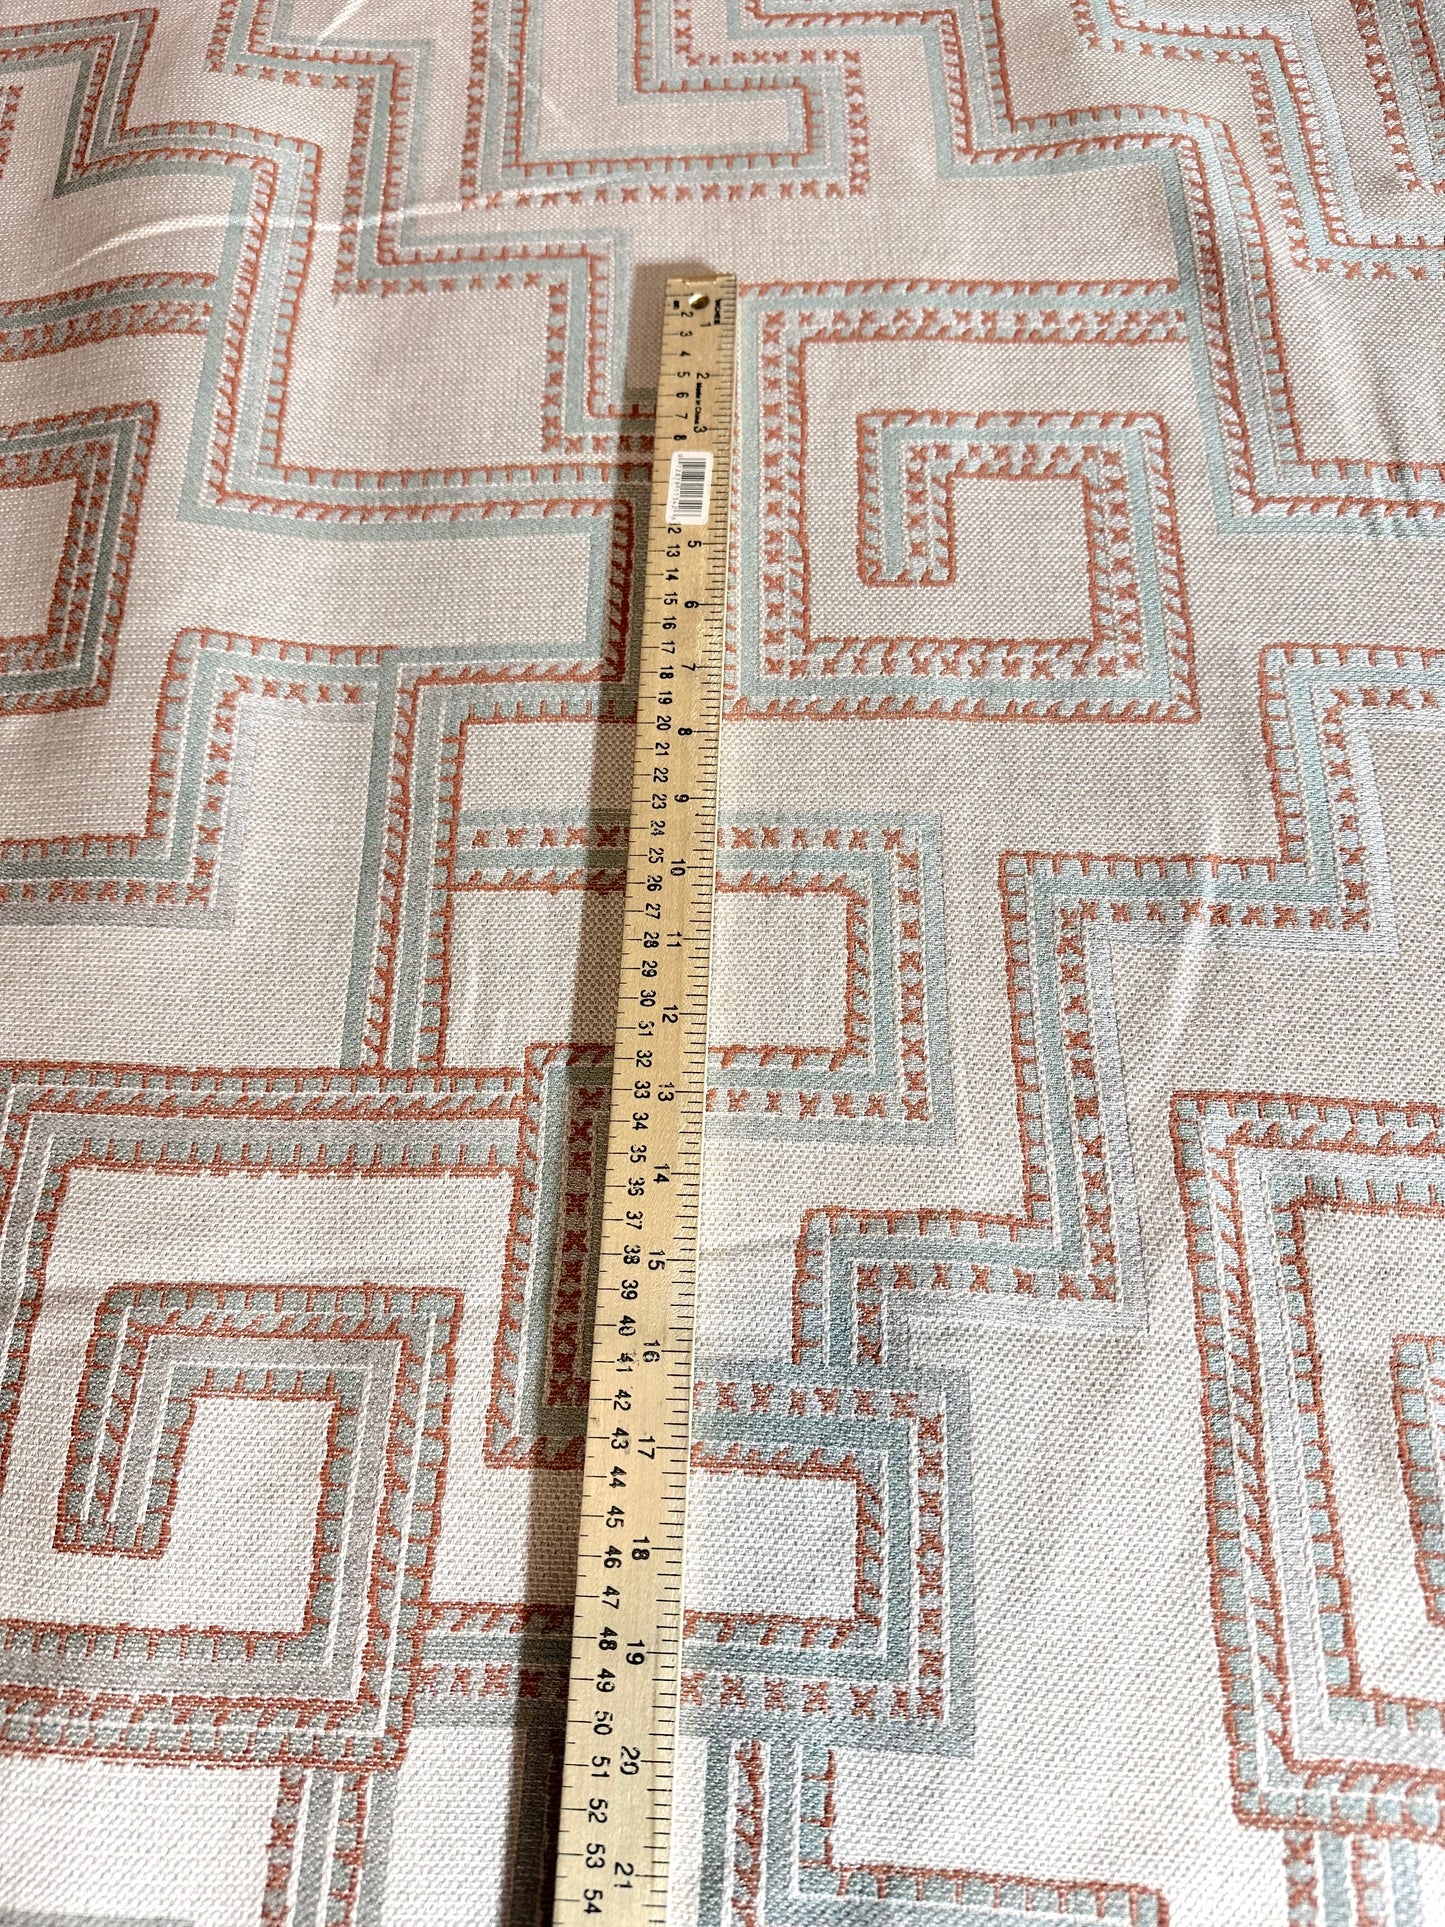 ETHAN ALLEN UPHOLSTERY STAIN RELEASE IMPERIAL GEOMETRIC FABRIC 58" WIDE BY YARD